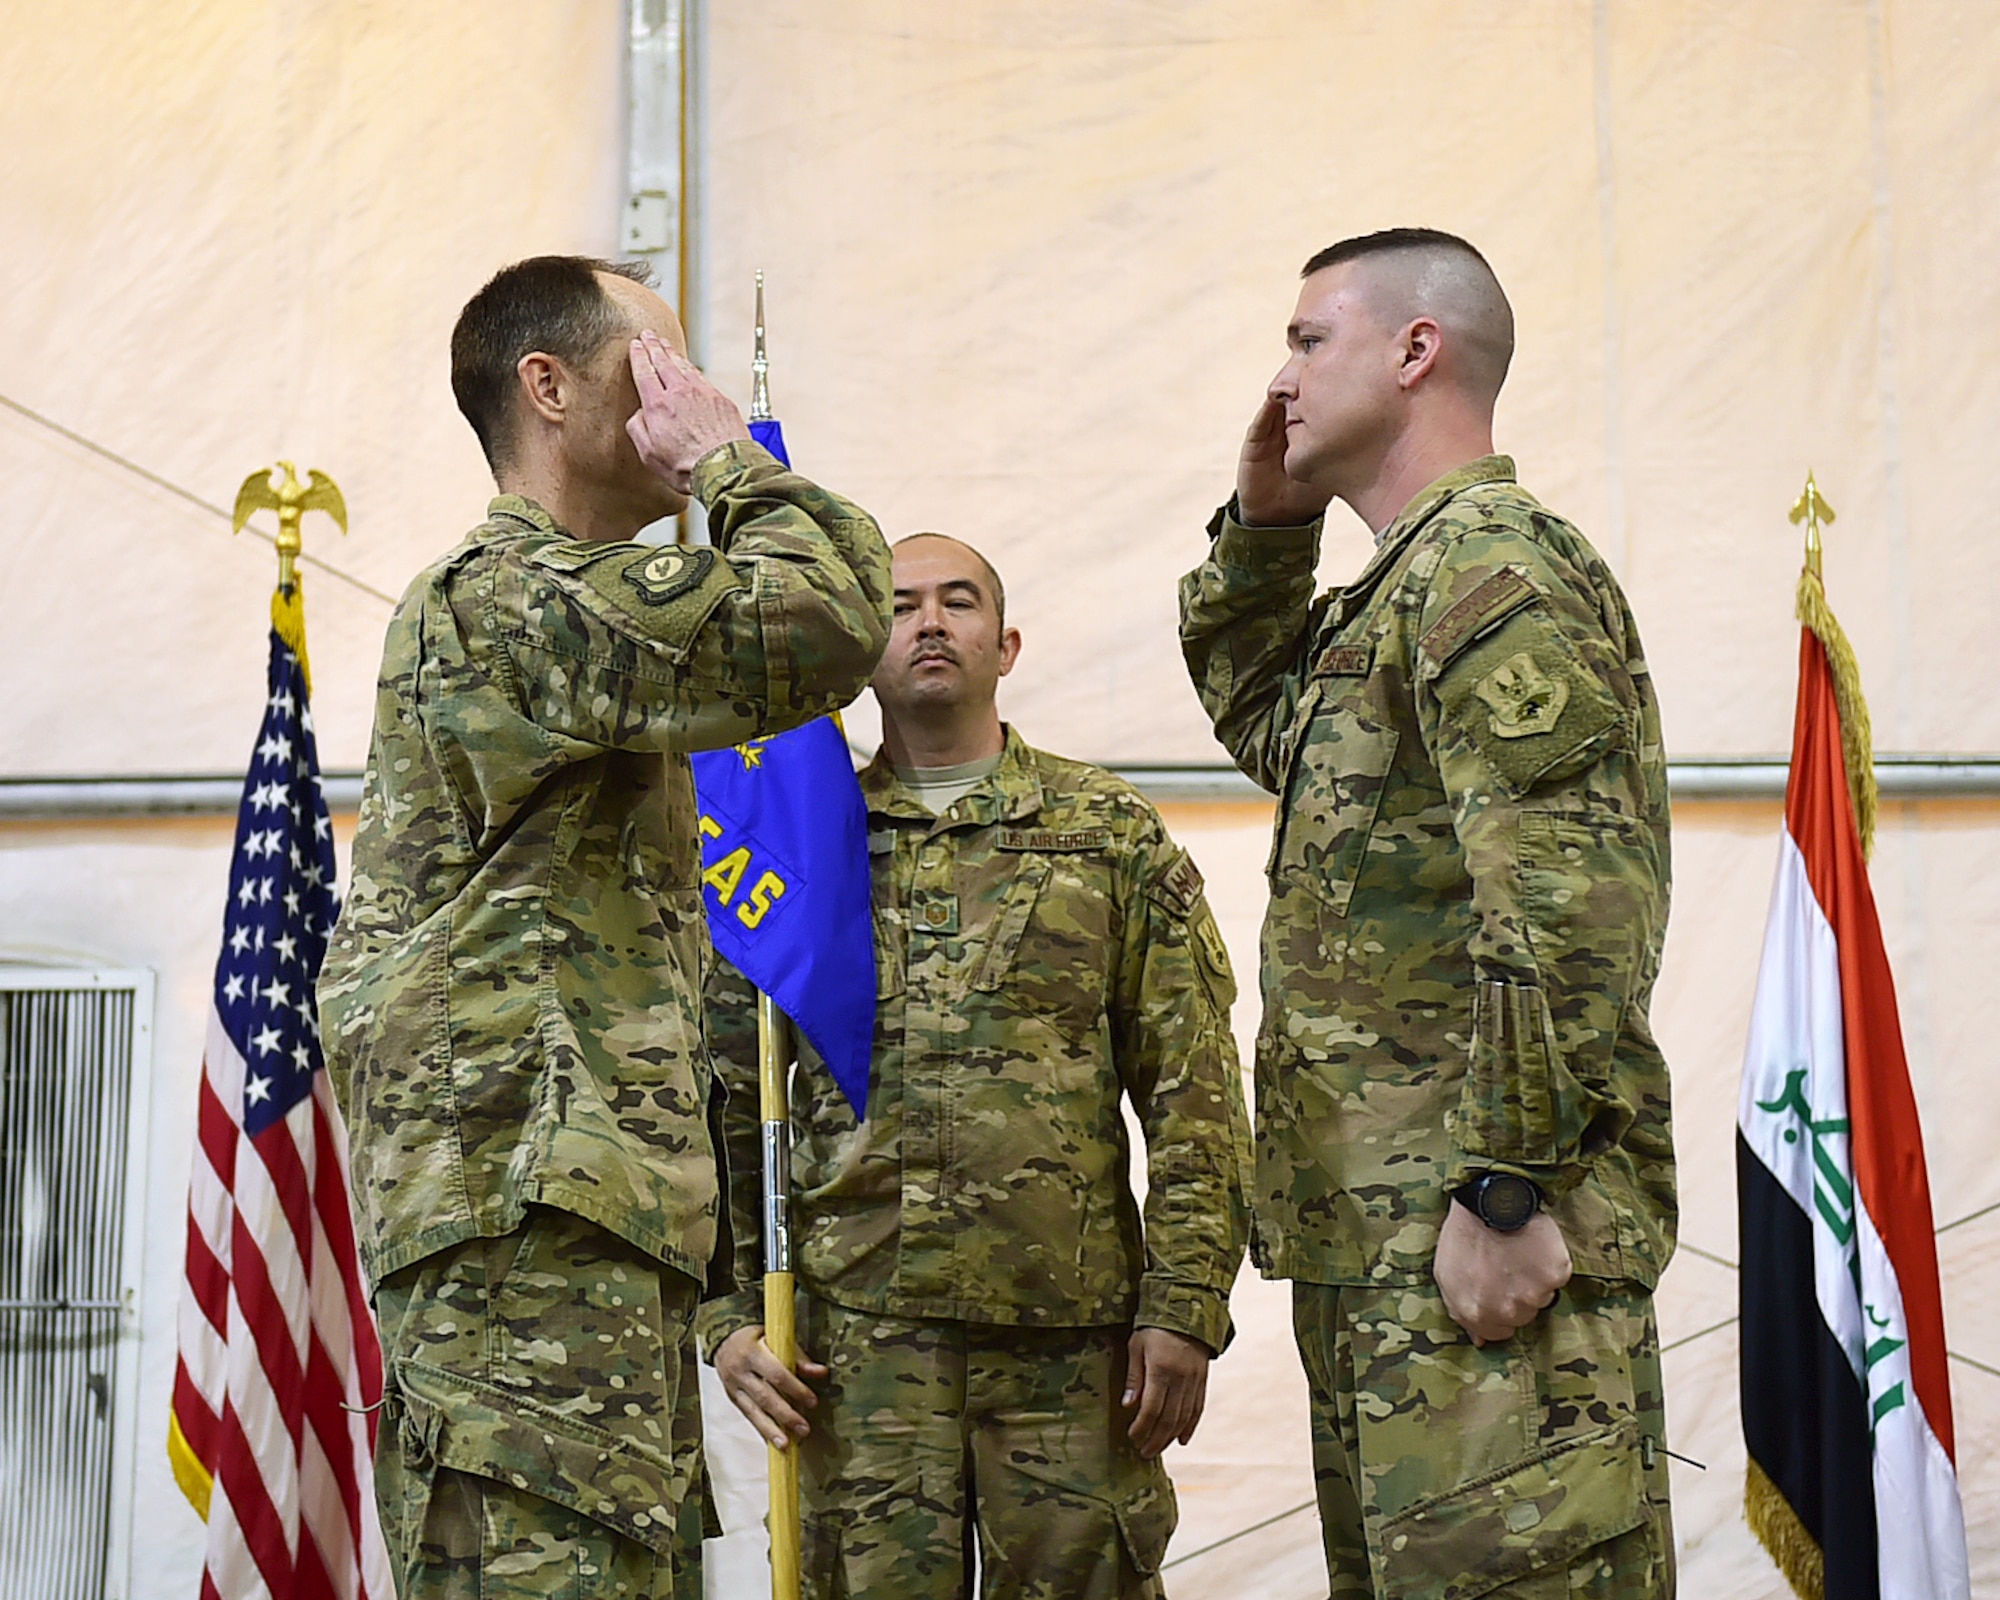 Maj. Eric Quidley, 770th Air Expeditionary Advisory Squadron outgoing commander, renders a salute to Col. Bradley Bridges, 370th Air Expeditionary Advisory Group commander, during a change of command ceremony in Baghdad, Iraq, Jan. 9, 2016. Maj. Todd Meyers, previously assigned to the 911th Maintenance Group, will assume command of the 770th AEAS which provides direct support to the Iraqi Air Force through aircraft maintenance advise and assist missions.  (U.S. Air Force photo by Staff Sgt. Jerilyn Quintanilla)